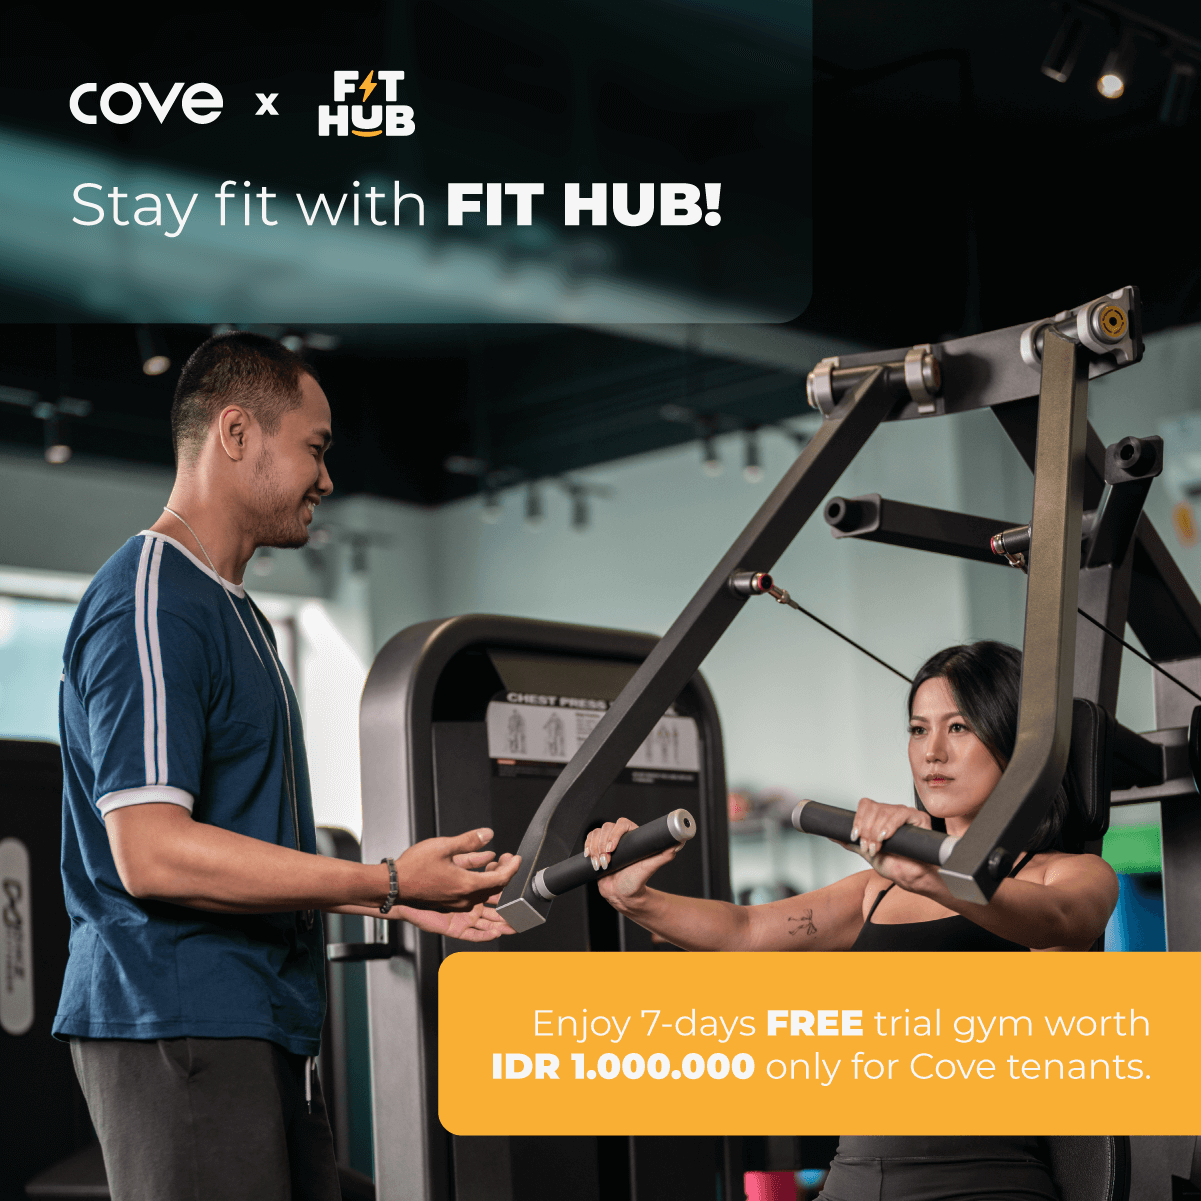 Claim your FREE gym access at FIT HUB!